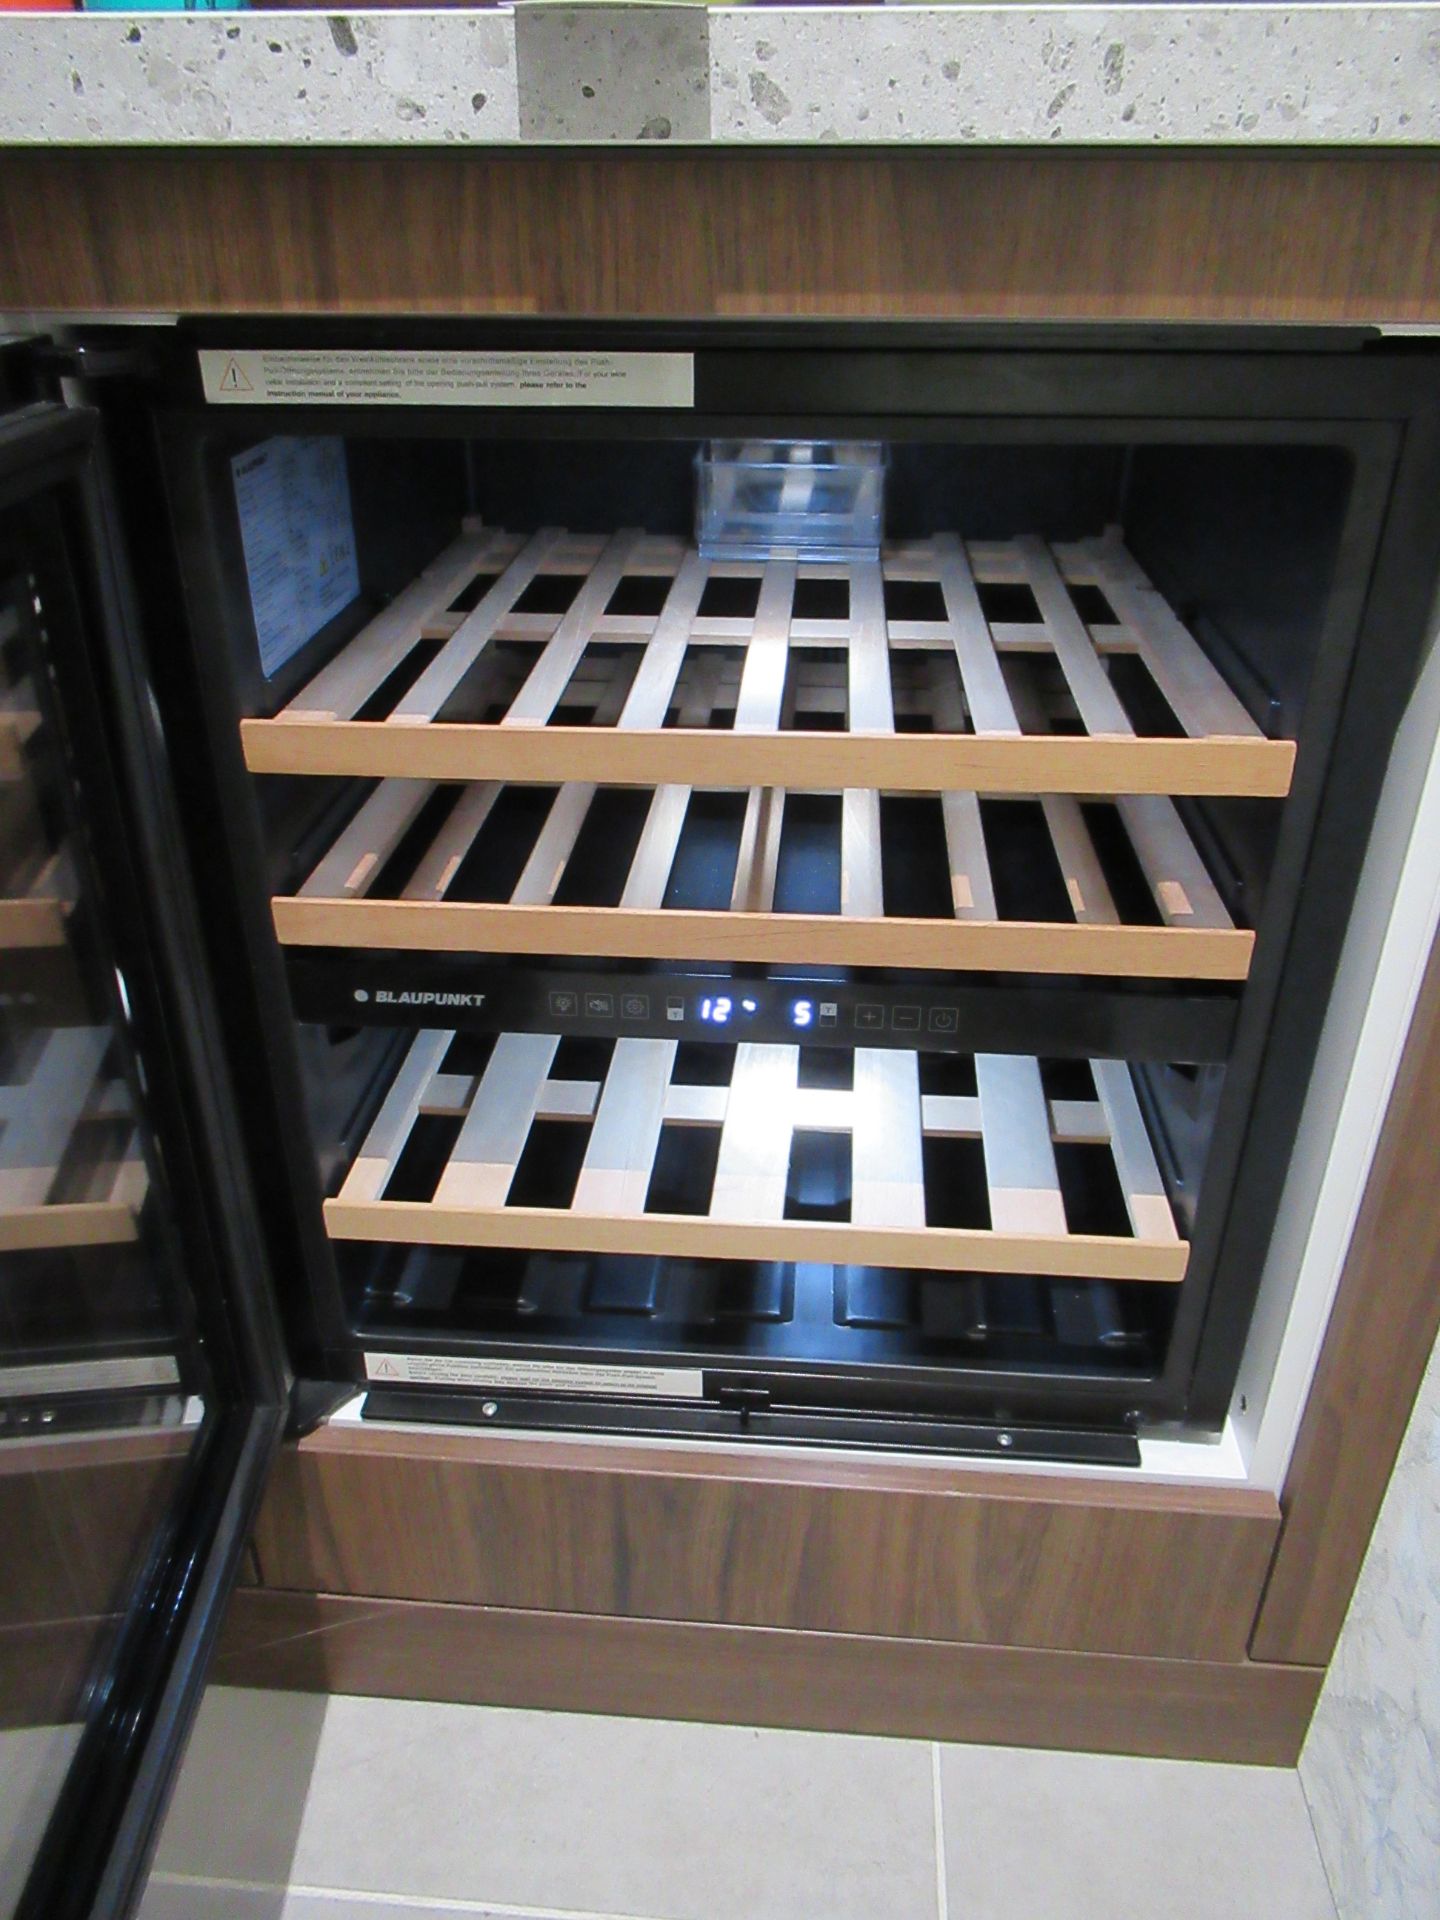 Display Pantry in Walnut Effect with Laminate Worktop and Blaupunkt Model 5WK610FF0L Bottle Fridge - Image 3 of 4